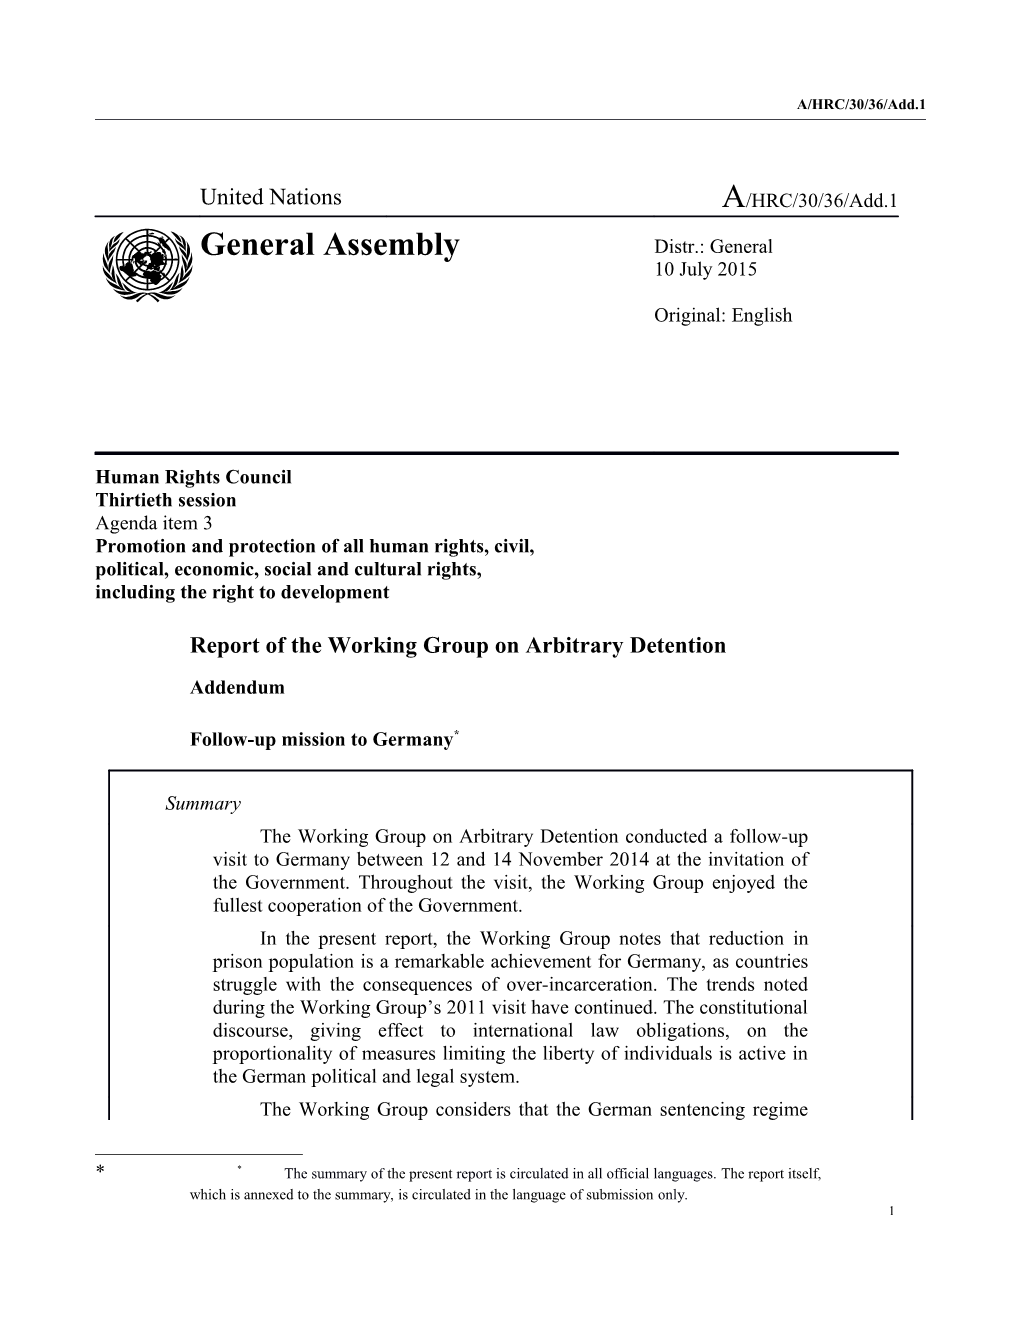 Report of the Working Group on Arbitrary Detention, Addendum - Follow-Up Mission to Germany